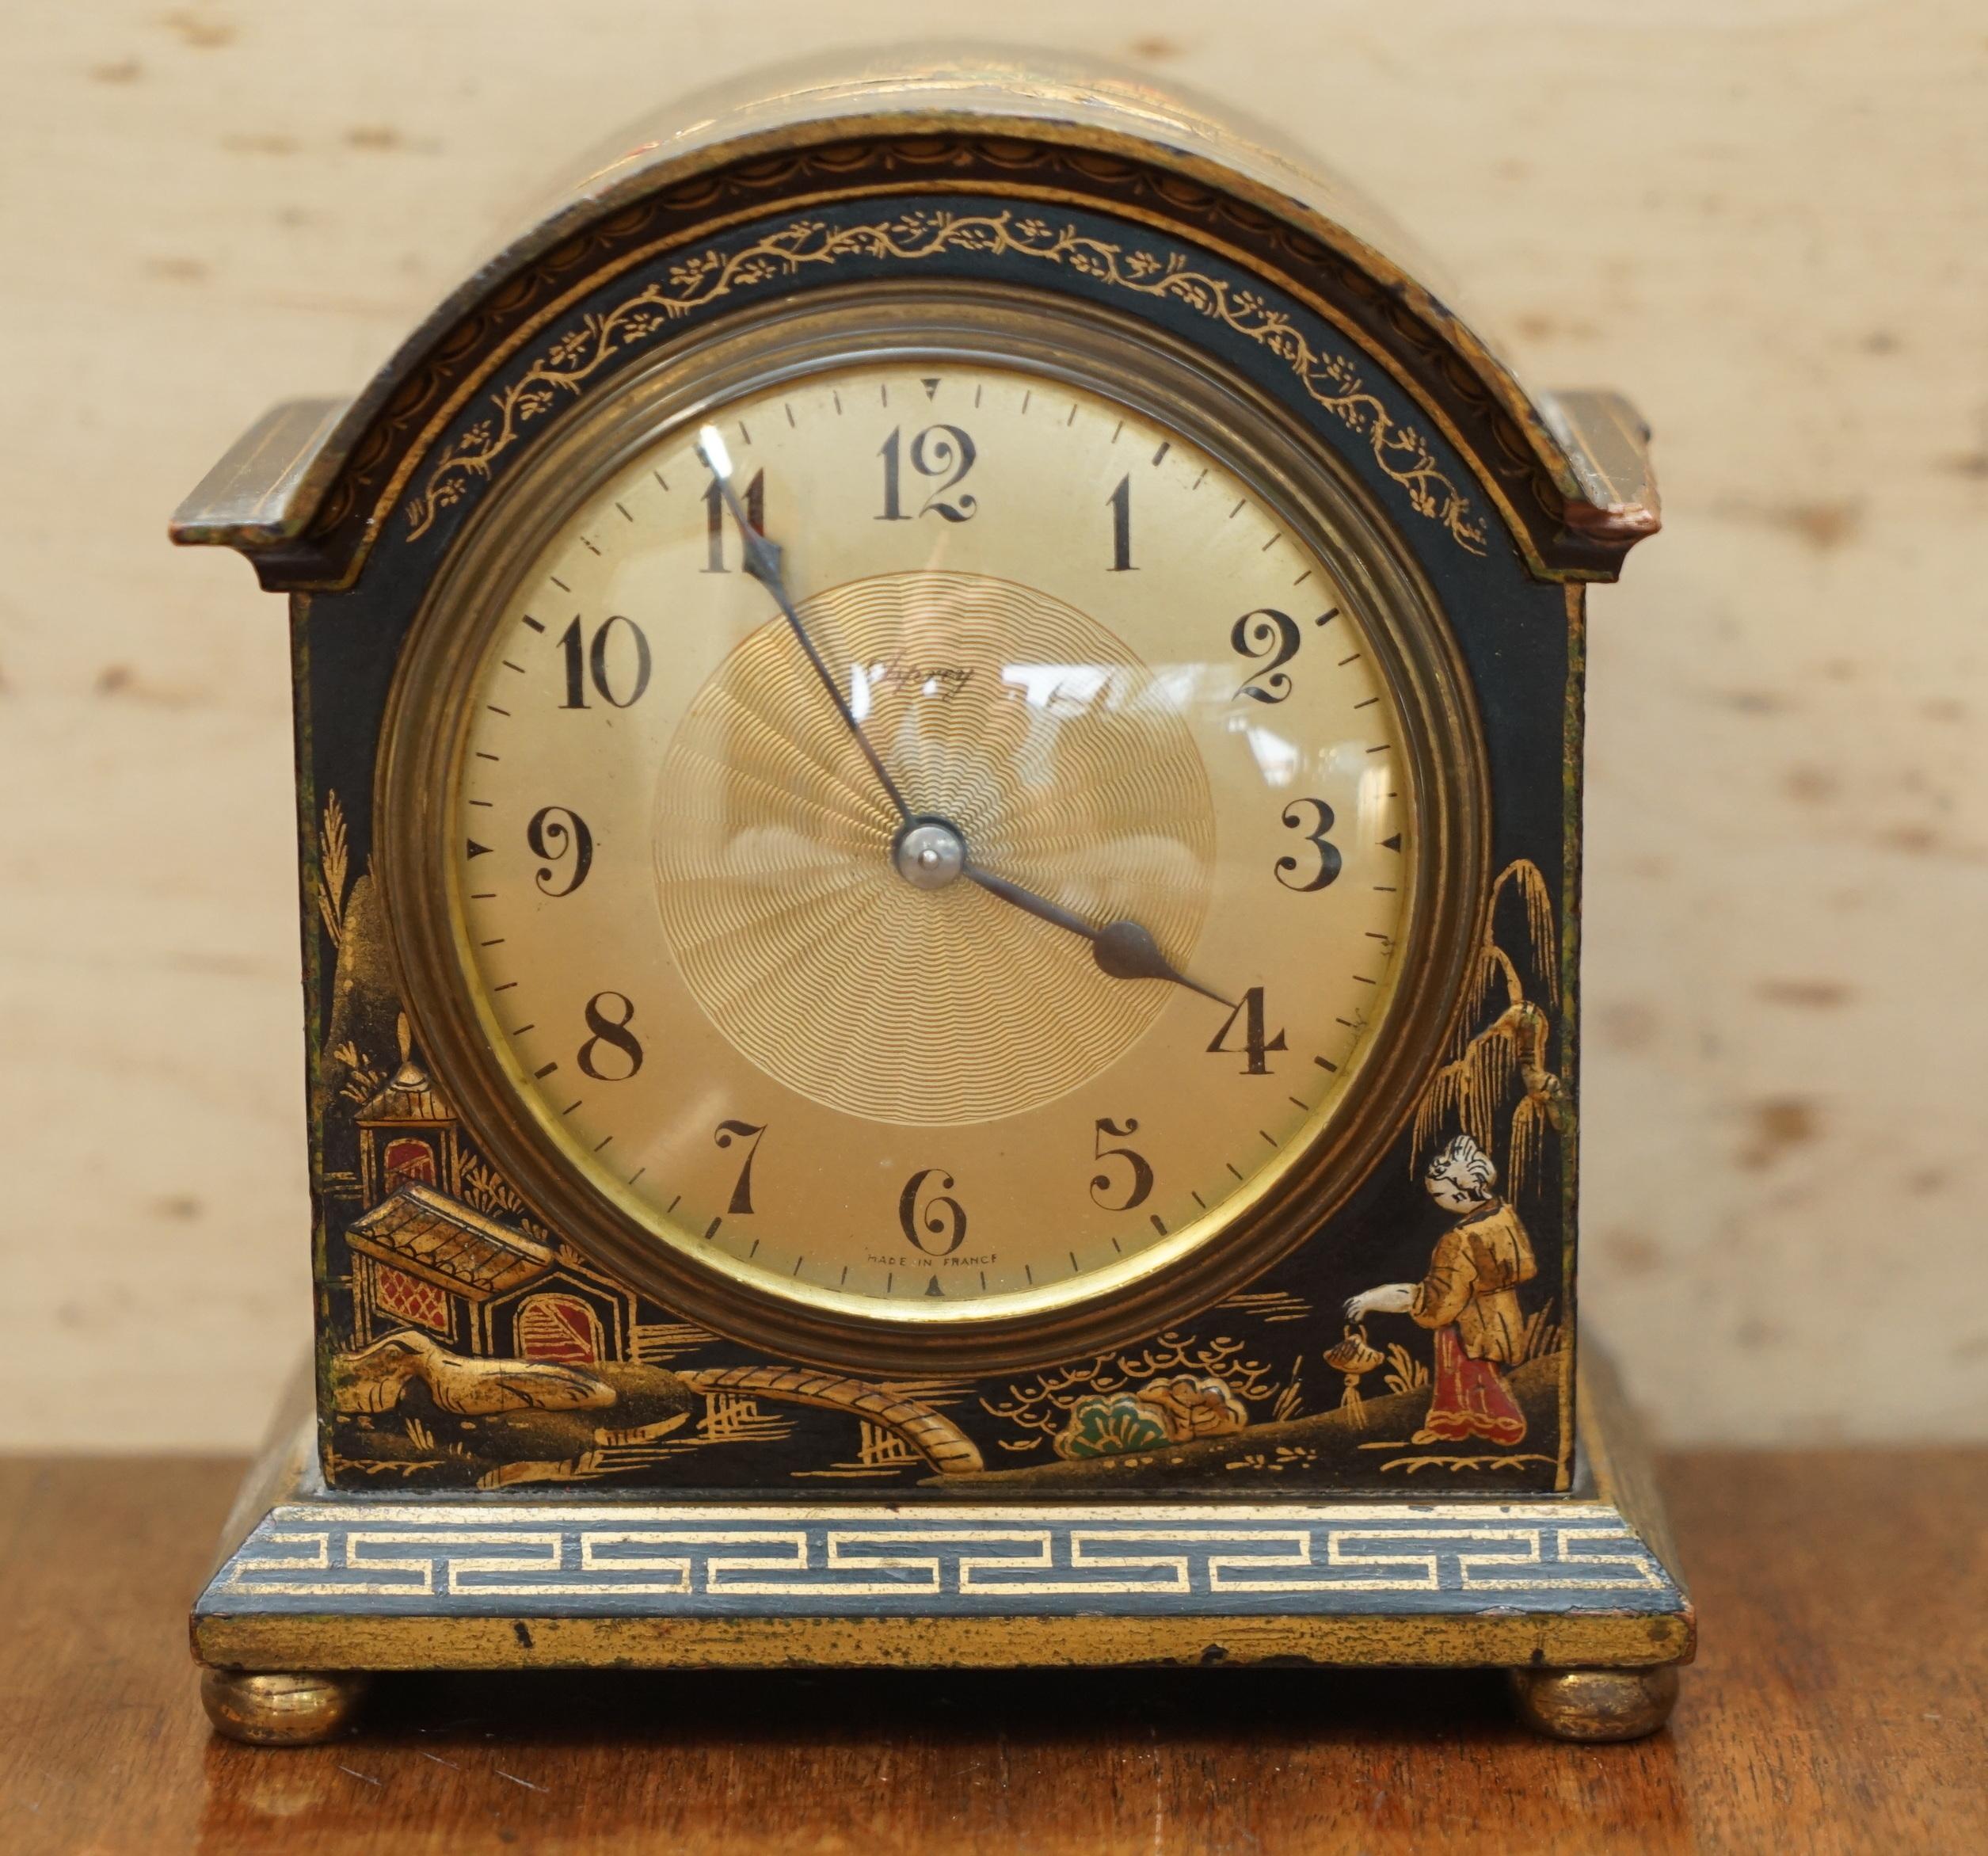 We are delighted to offer for sale this lovely original circa 1930’s Asprey London Chinoiserie mantle clock.

A very decorative and well made piece, retailed through one of the finest silversmiths England has ever produced, Asprey’s.

The clock